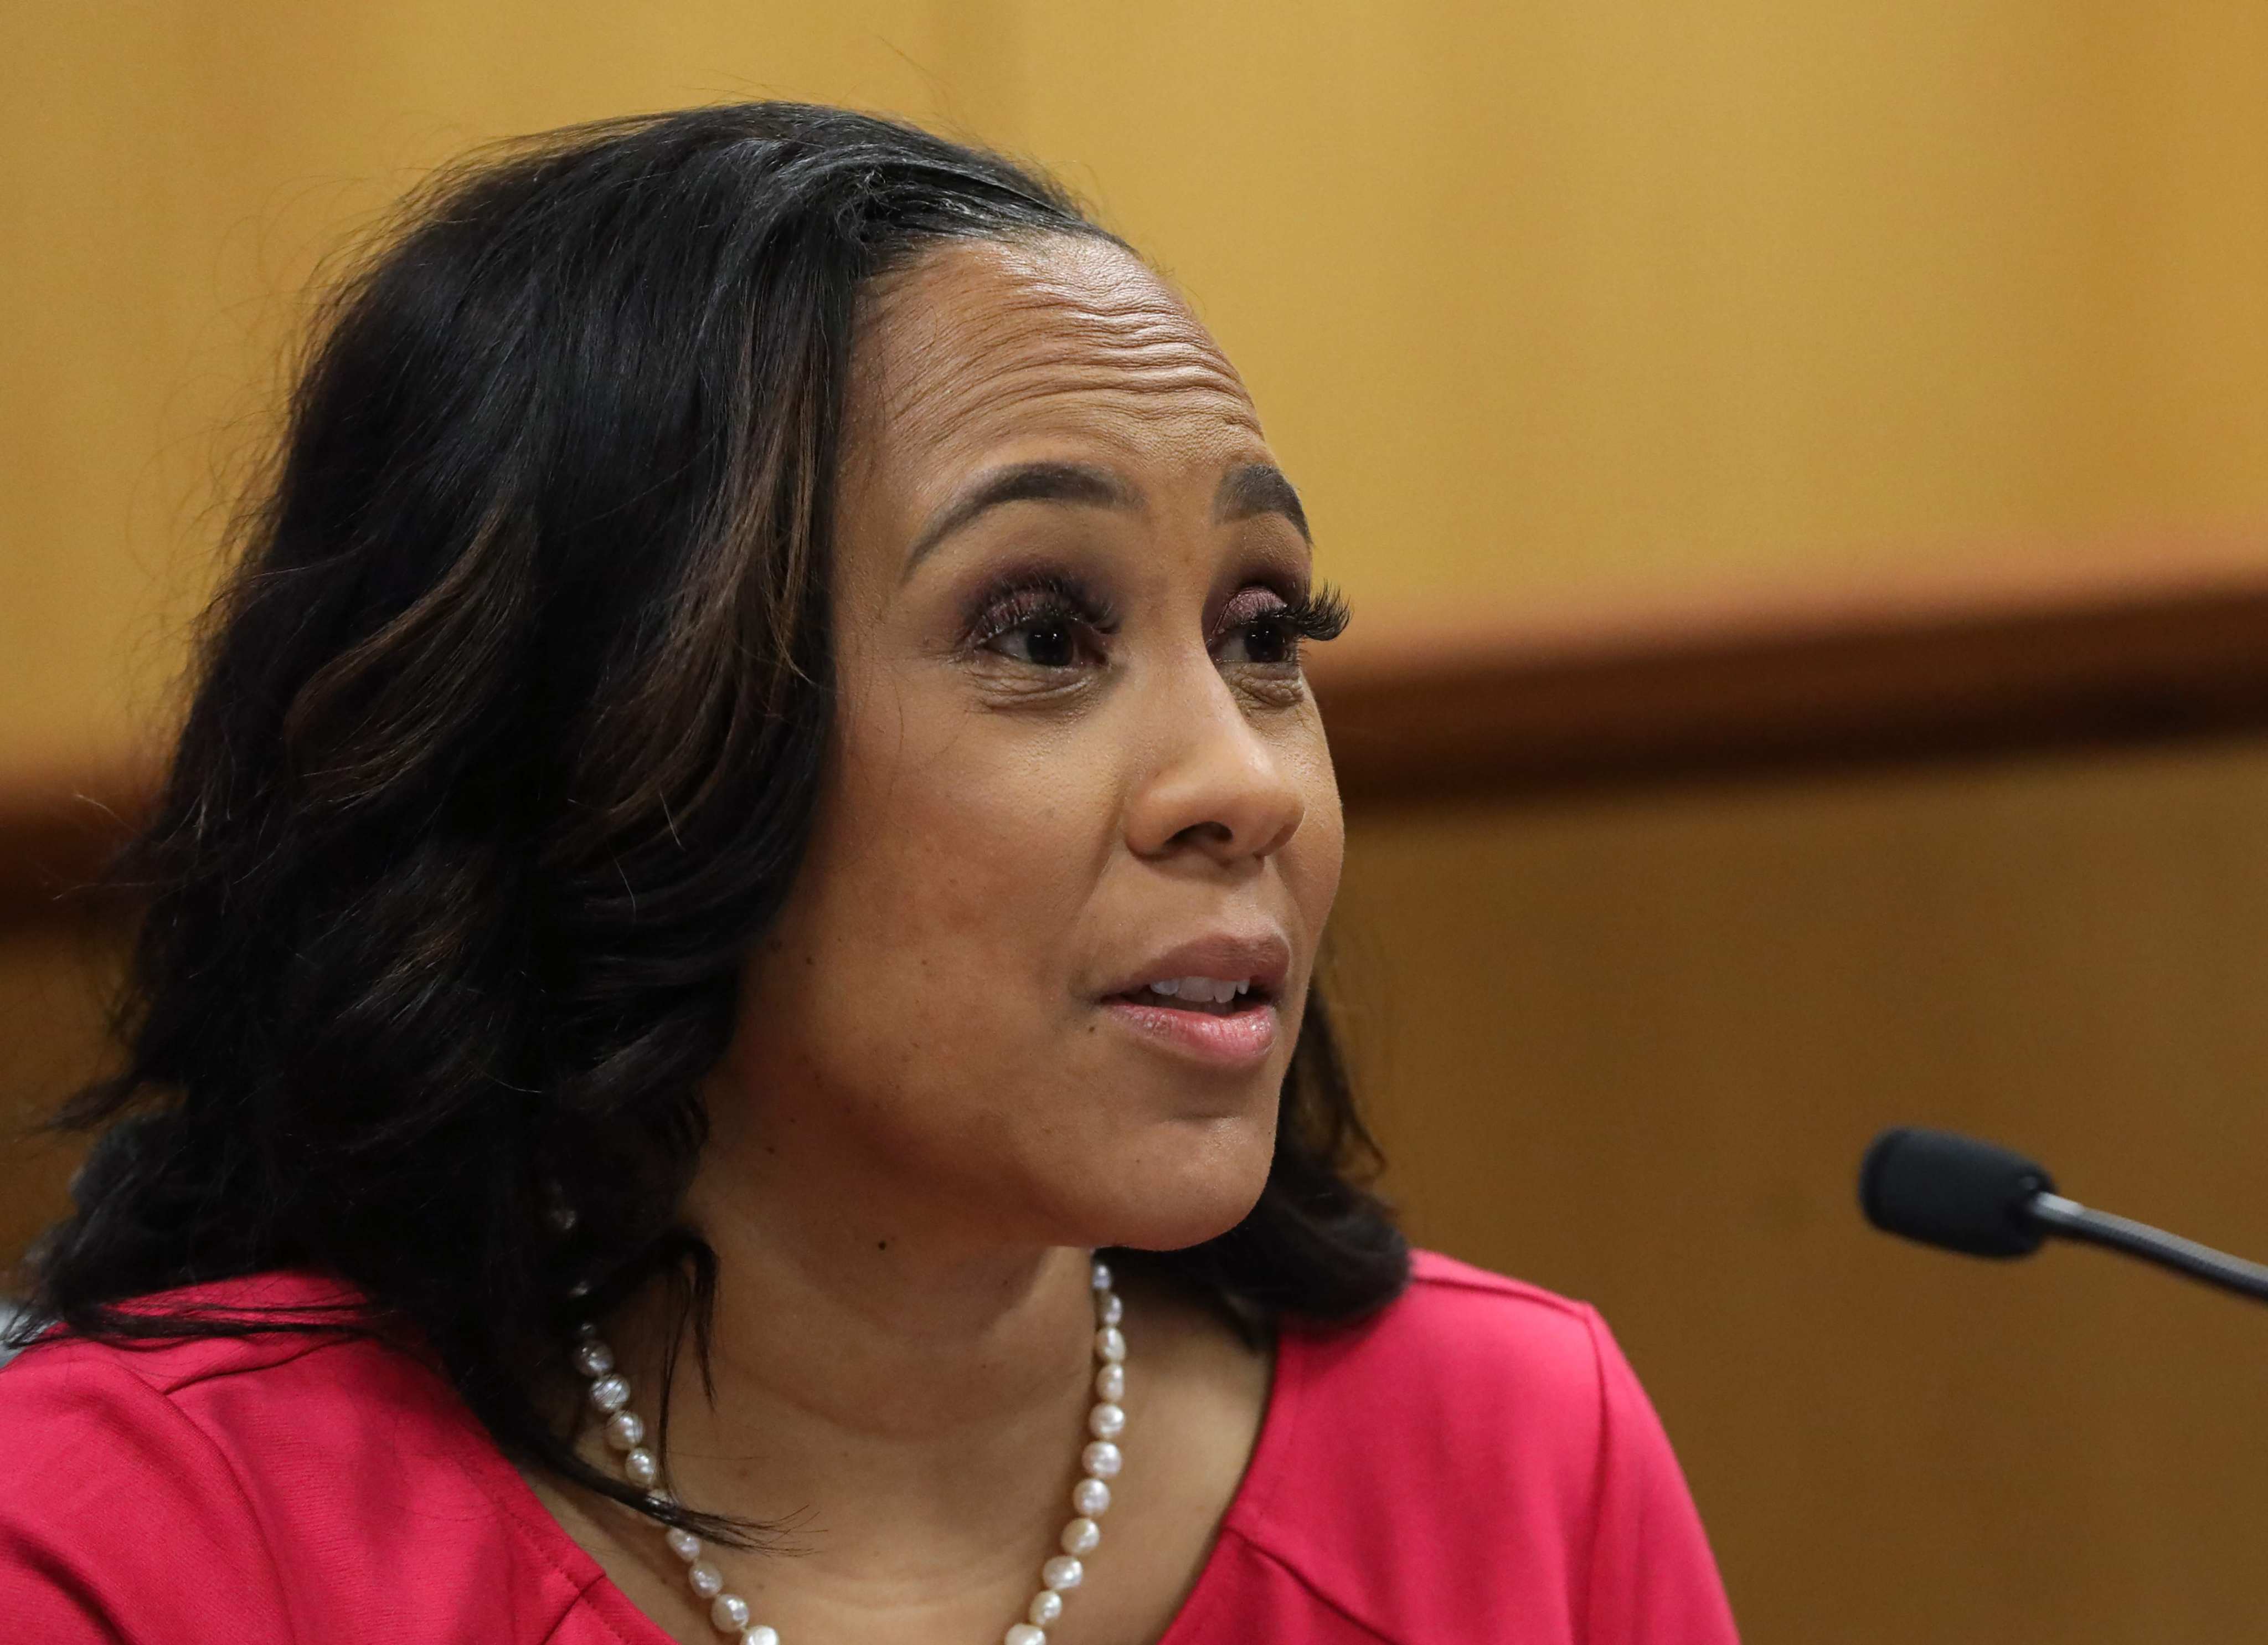 A judge ruled that Fulton County District Attorney Fani Willis, who brought 2020 election interference charges against former US President Donald Trump, can remain on the case if her lead prosecutor, Nathan Wade, with whom she had a romantic relationship, steps aside. Photo: AFP